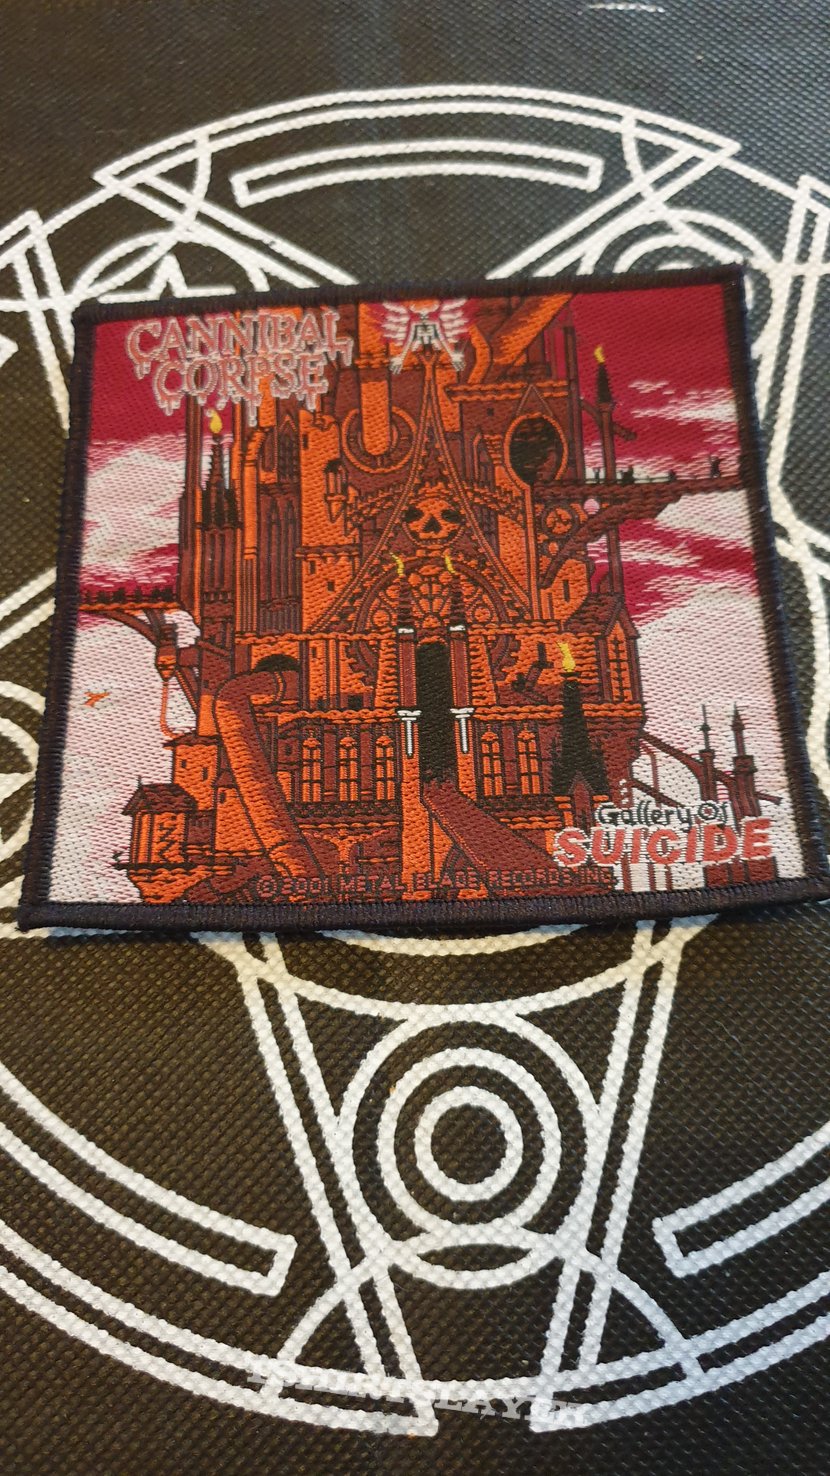 Cannibal Corpse Gallery Of Suicide 2001 Patch